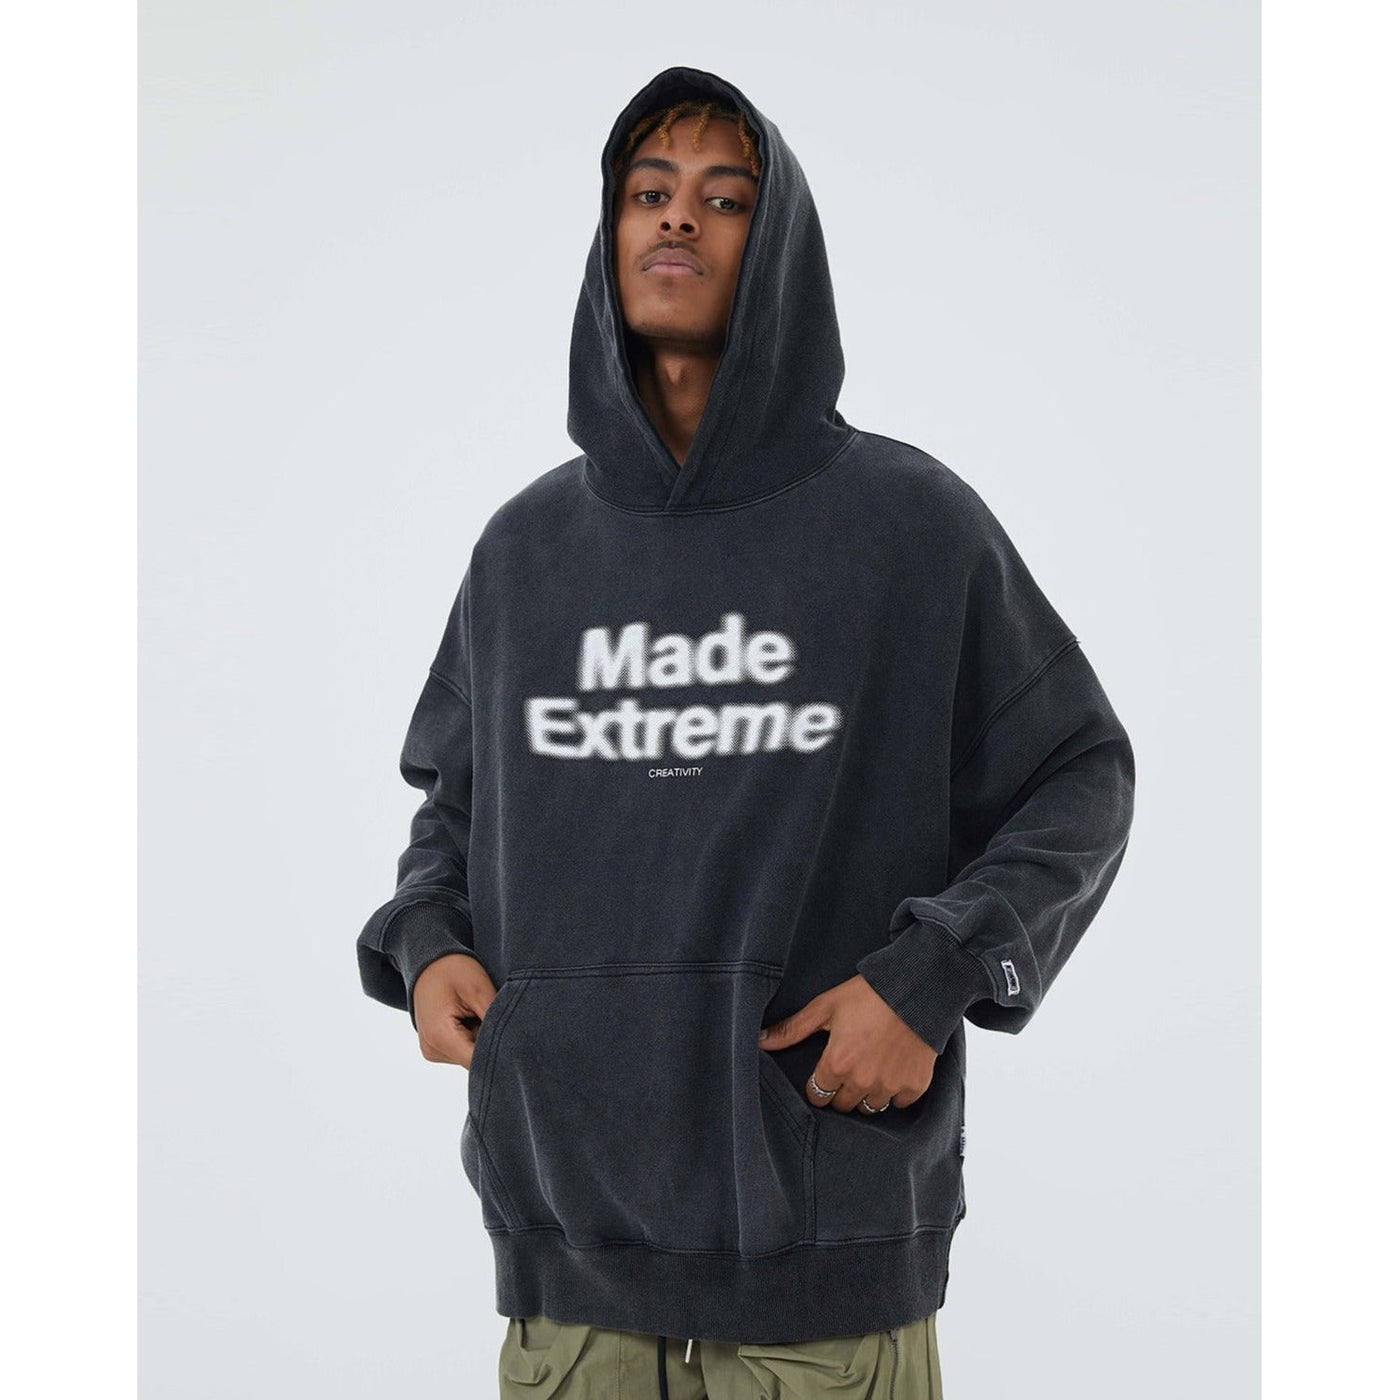 Smoke Effect Logo Hoodie Korean Street Fashion Hoodie By Made Extreme Shop Online at OH Vault